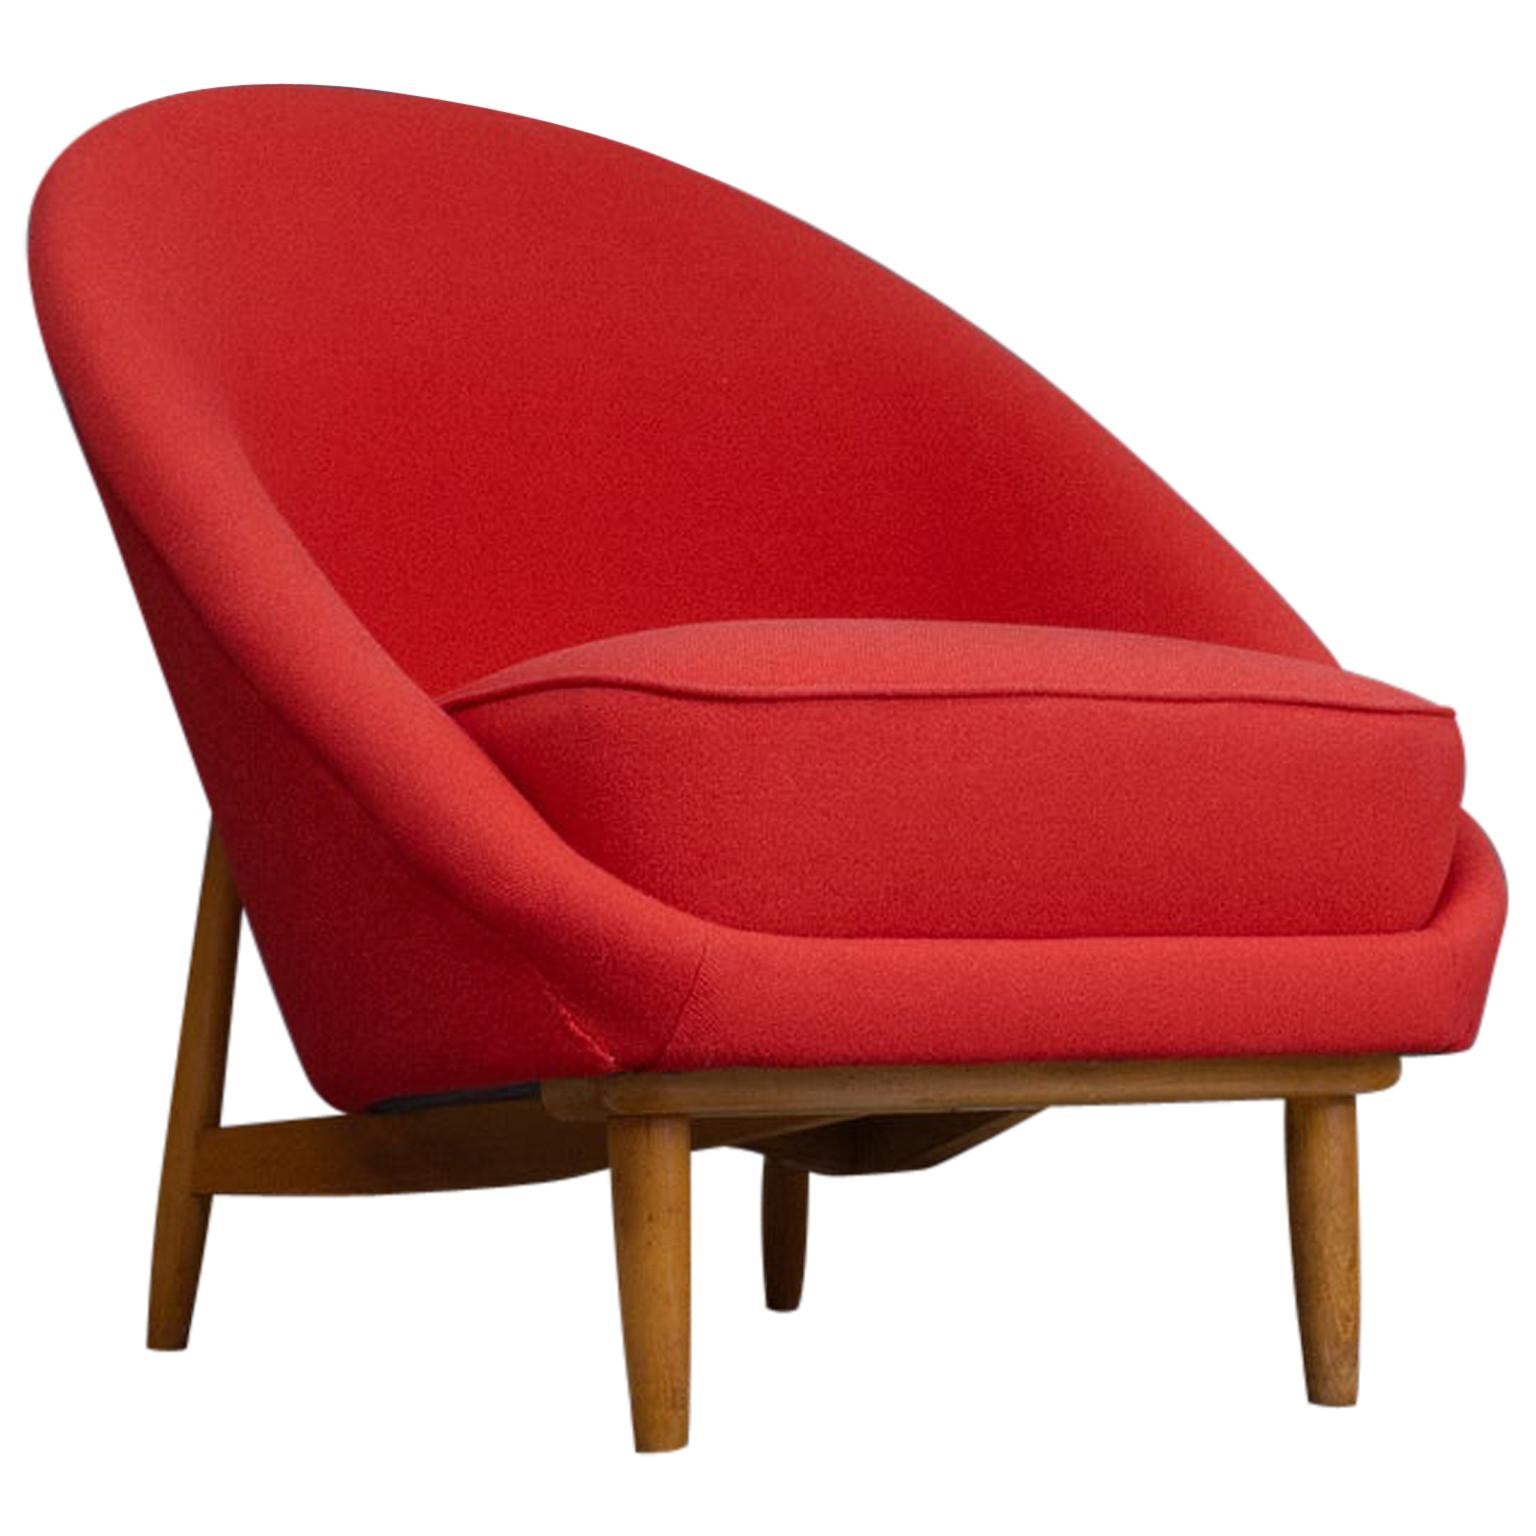 1958 Theo Ruth Red Club Chair no. 115 for Artifort, the Netherlands